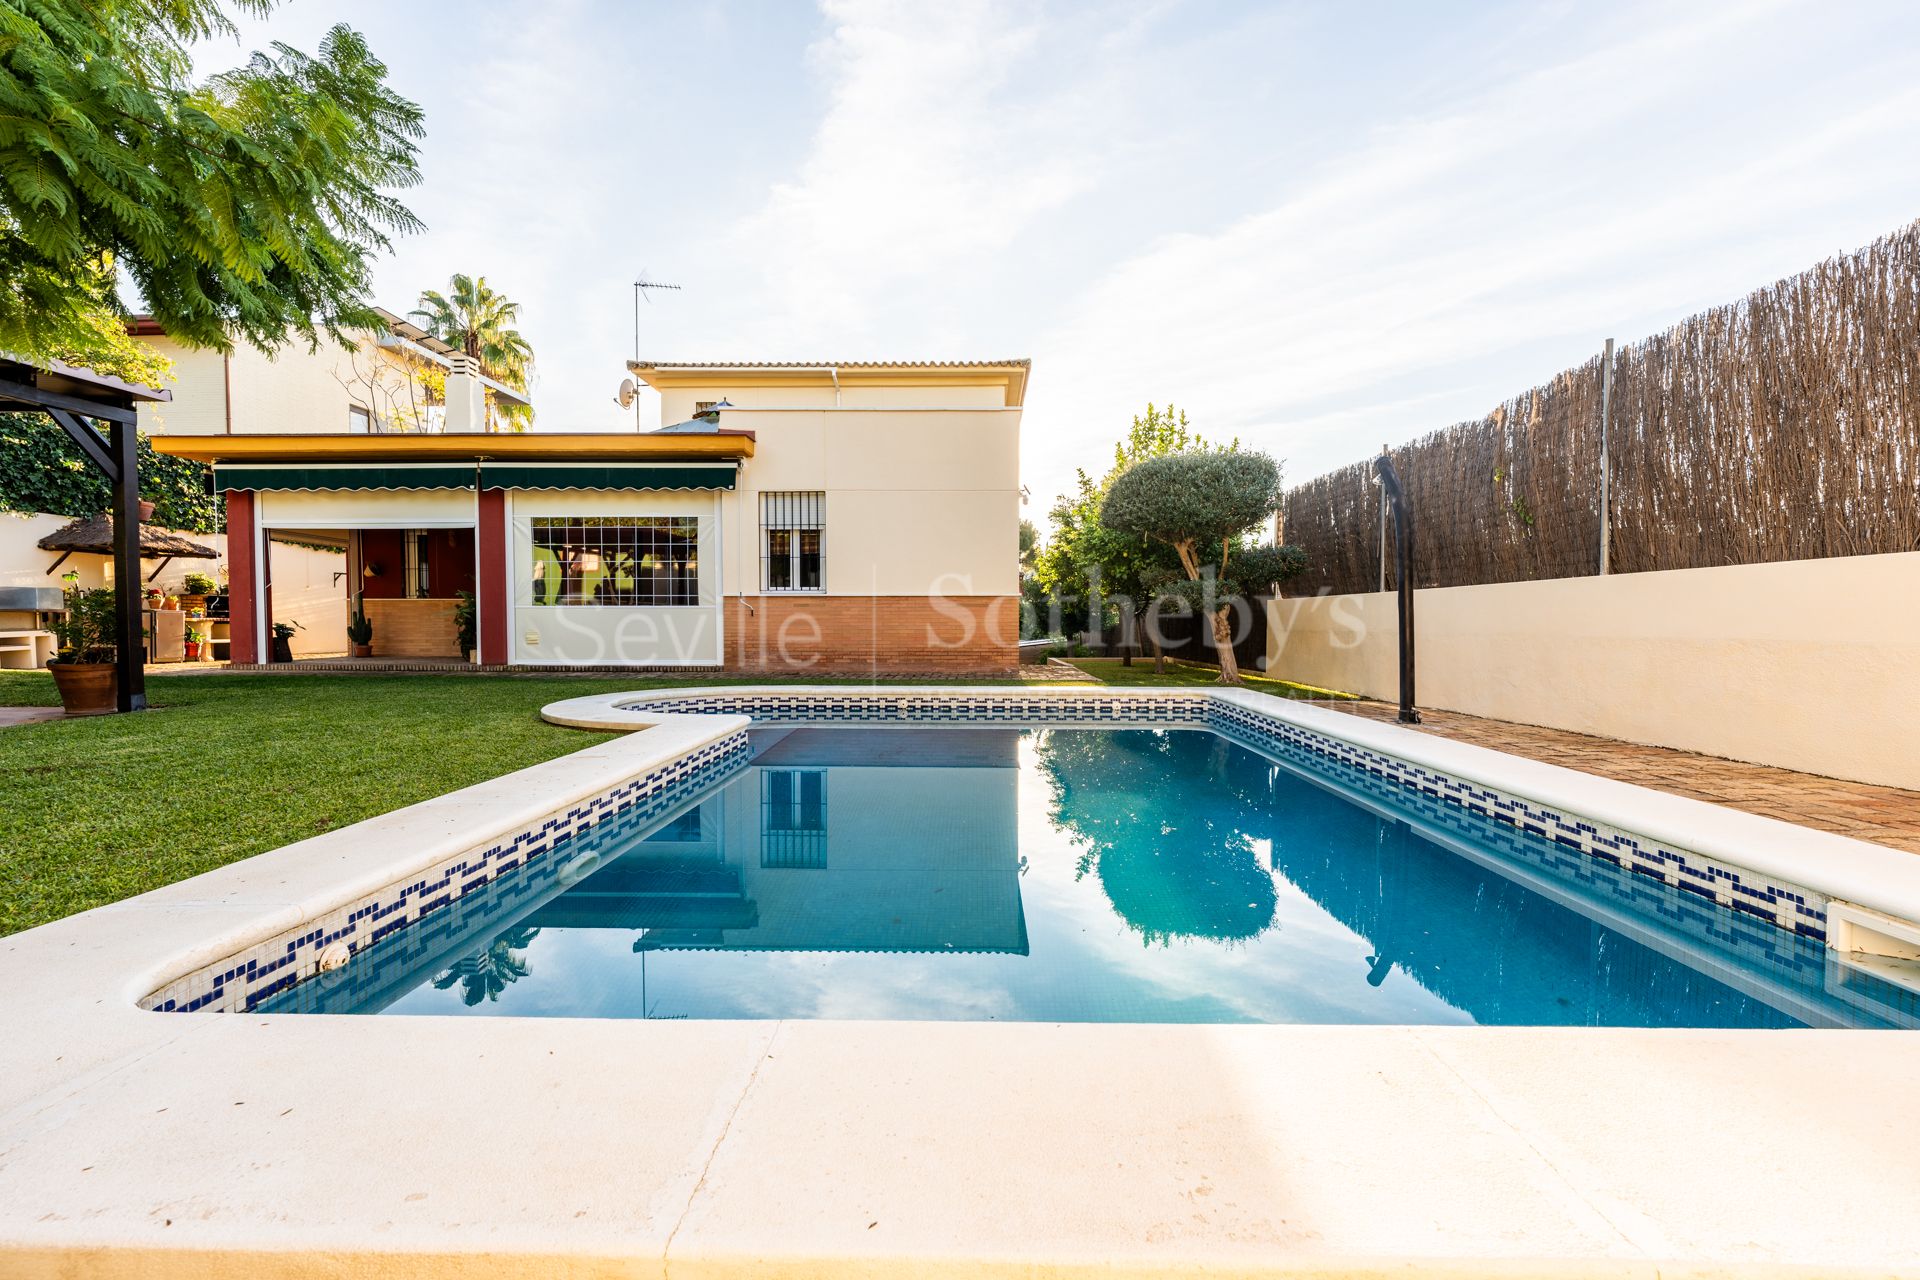 Independent house in gated community Cerros de Montequinto.